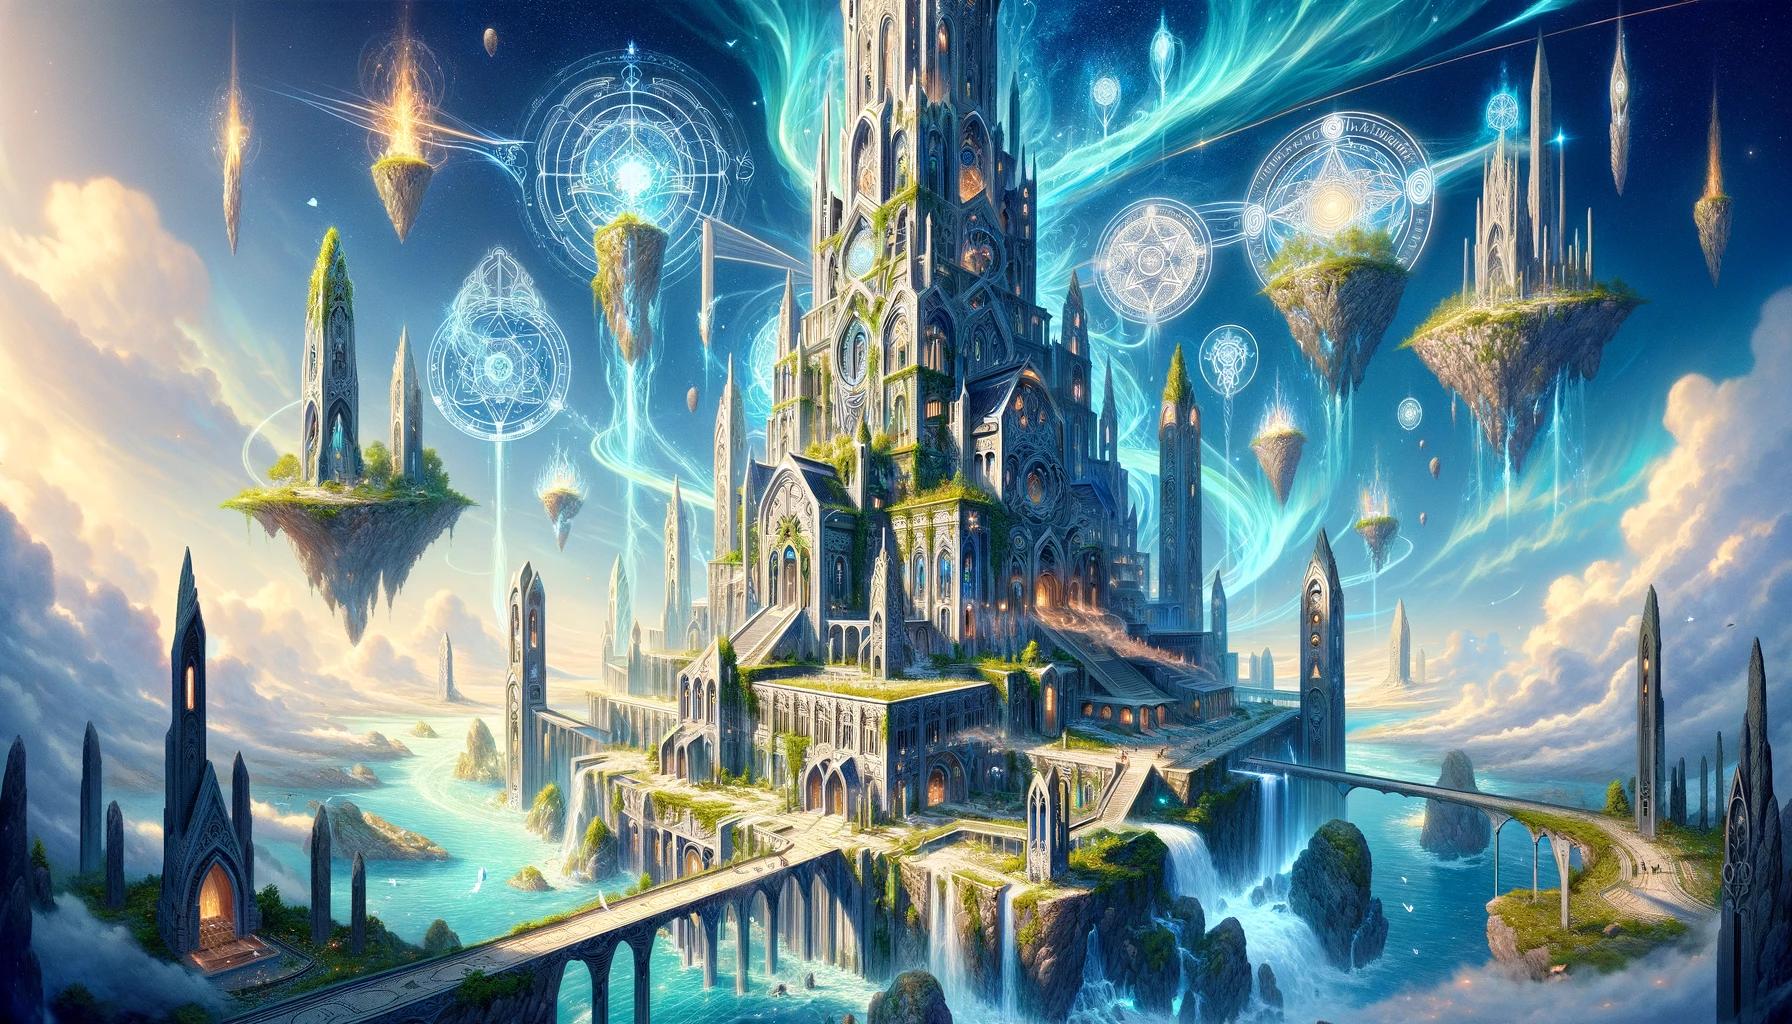 The high-rise building is a fantasy-style castle surrounded by flying islands and clouds.